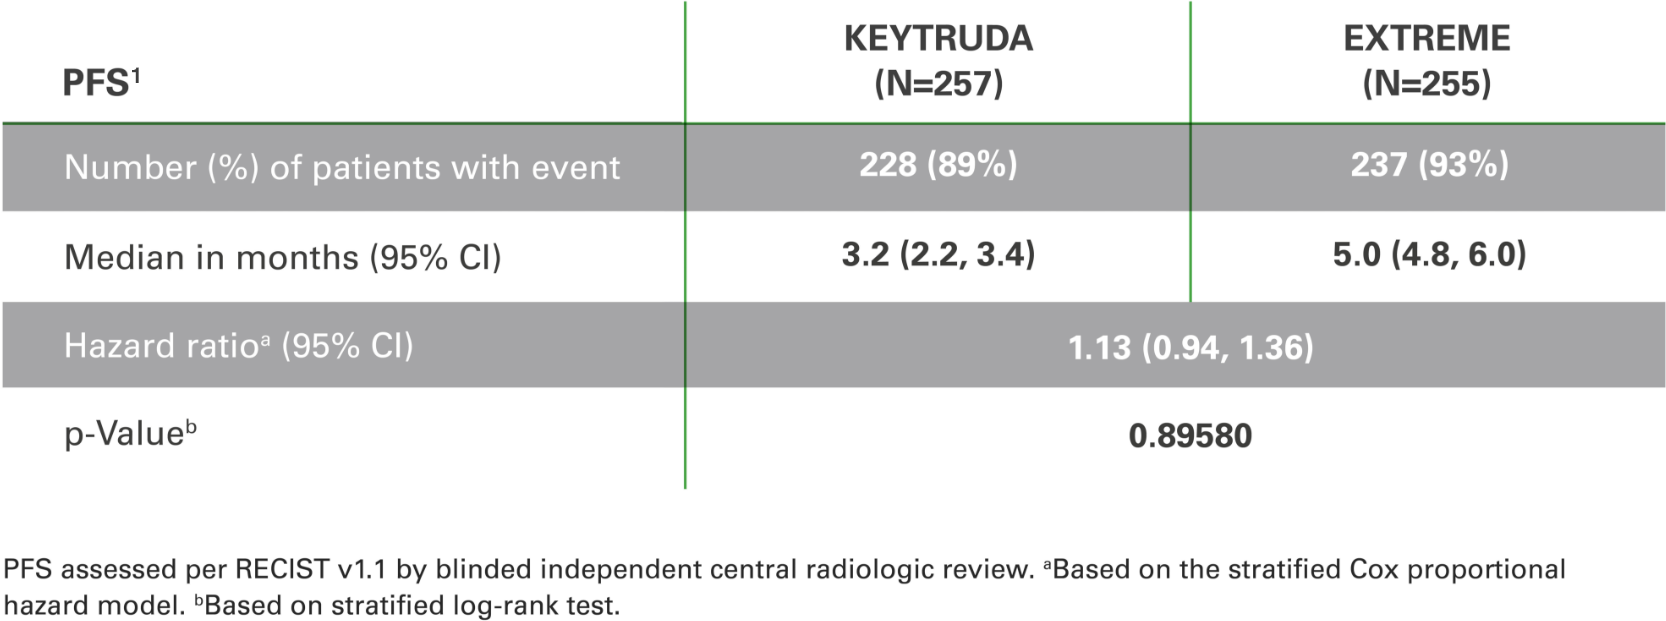 Table of progression-free survival in for HNSCC patients in KEYNOTE 048, KEYTRUDA (pembrolizumab) vs EXTREME